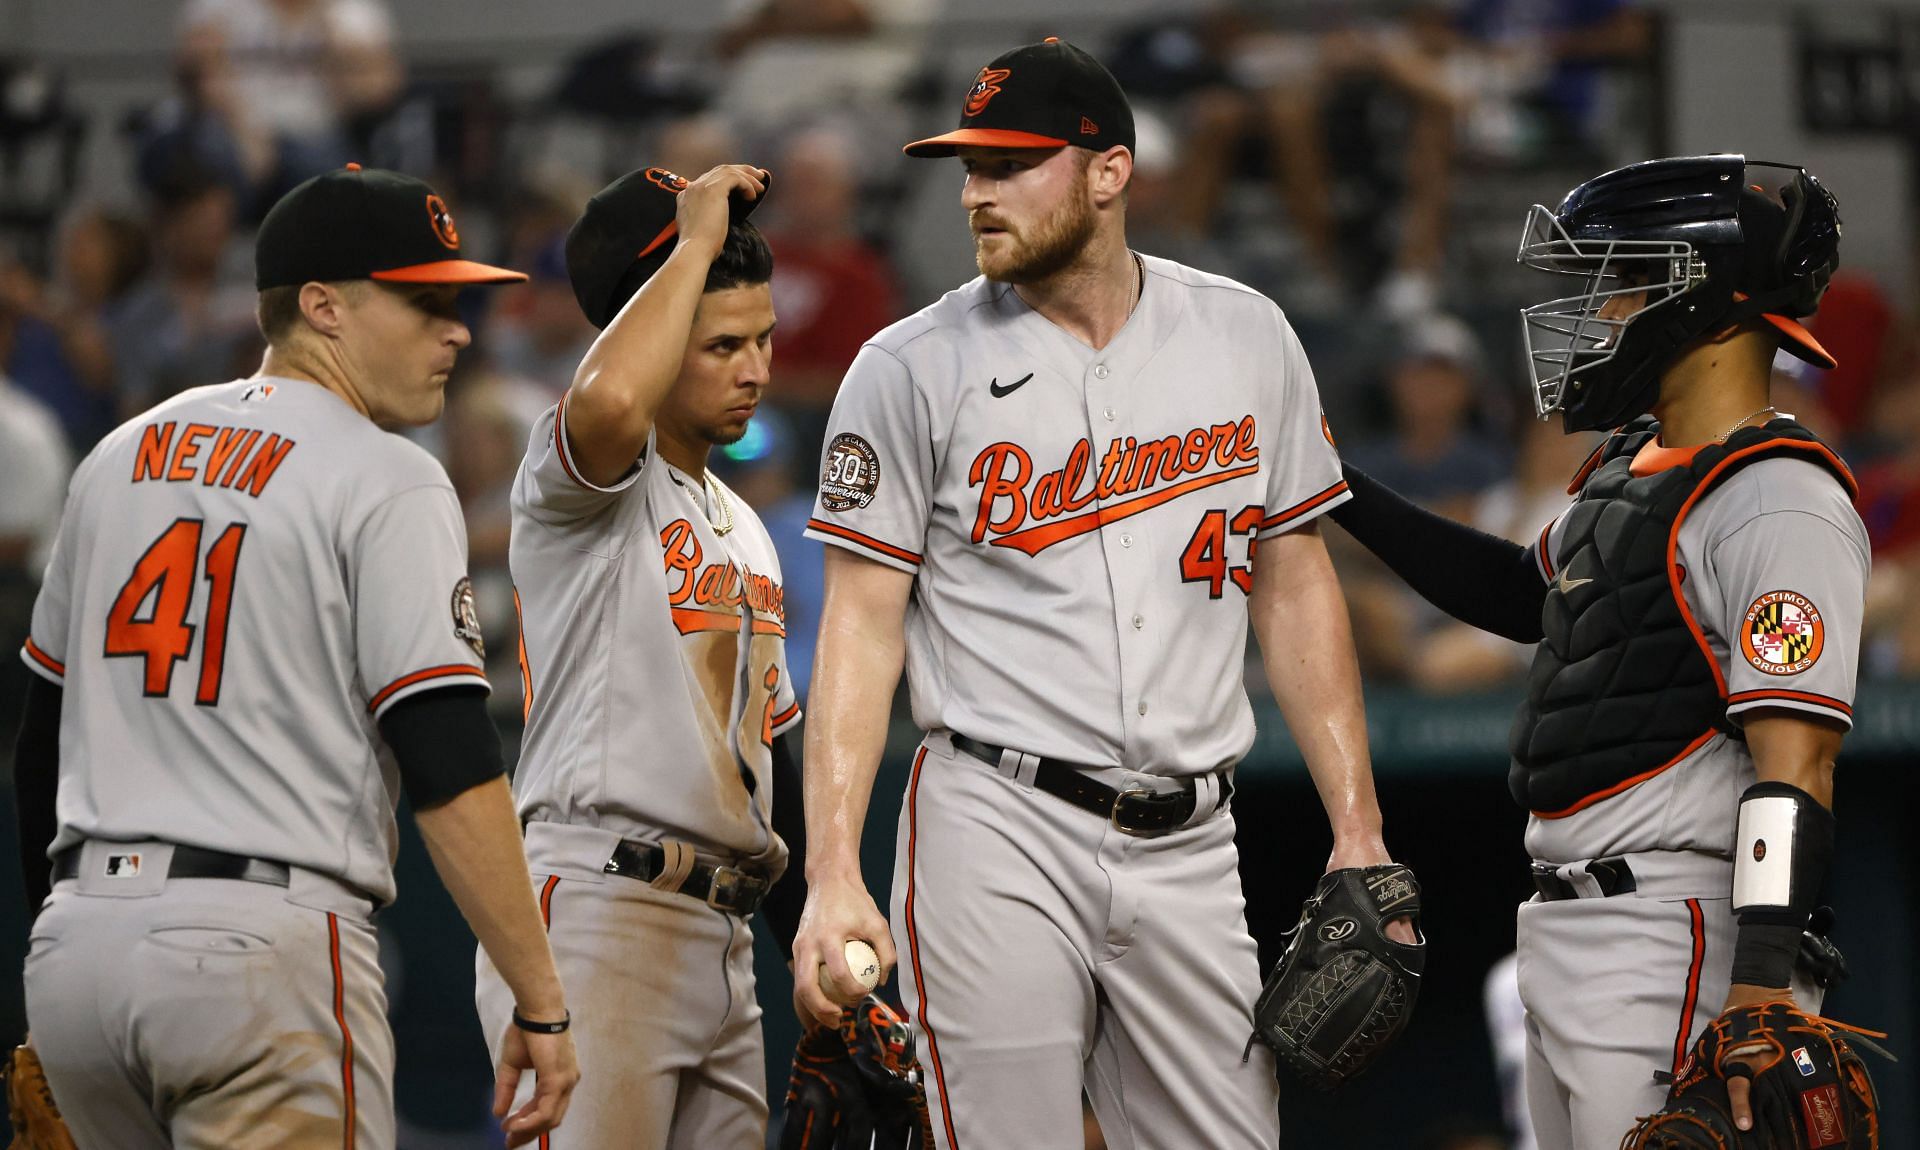 Baseball fights are so lame” “The bullpen running out to do absolutely  nothing is always my favorite part” - MLB Twitter reacts to  benches-clearing during Baltimore Orioles' 9-6 win over Toronto Blue